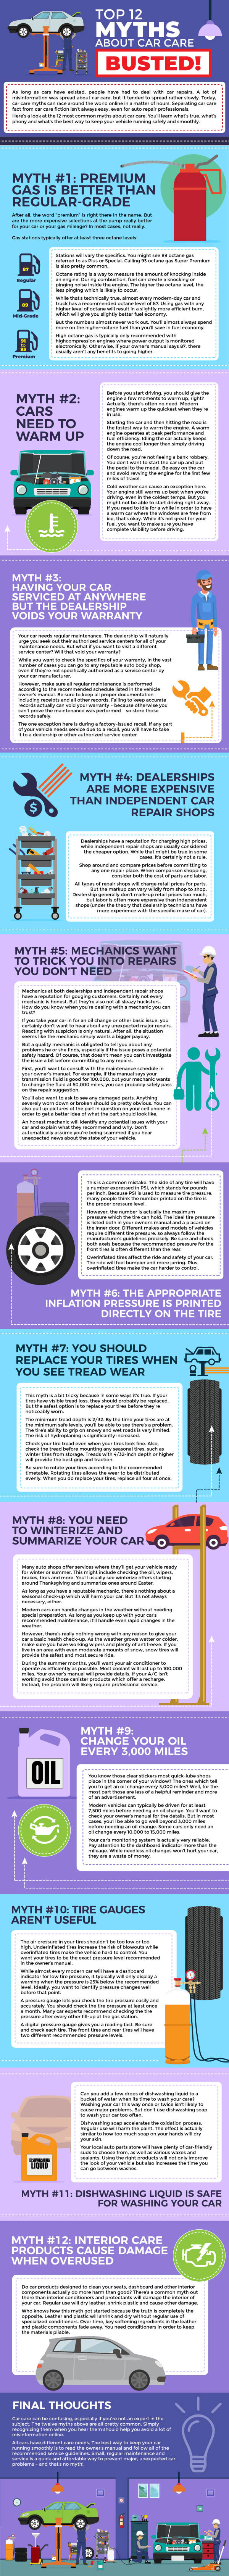 top-12-car-care-myths-infographic-plaza